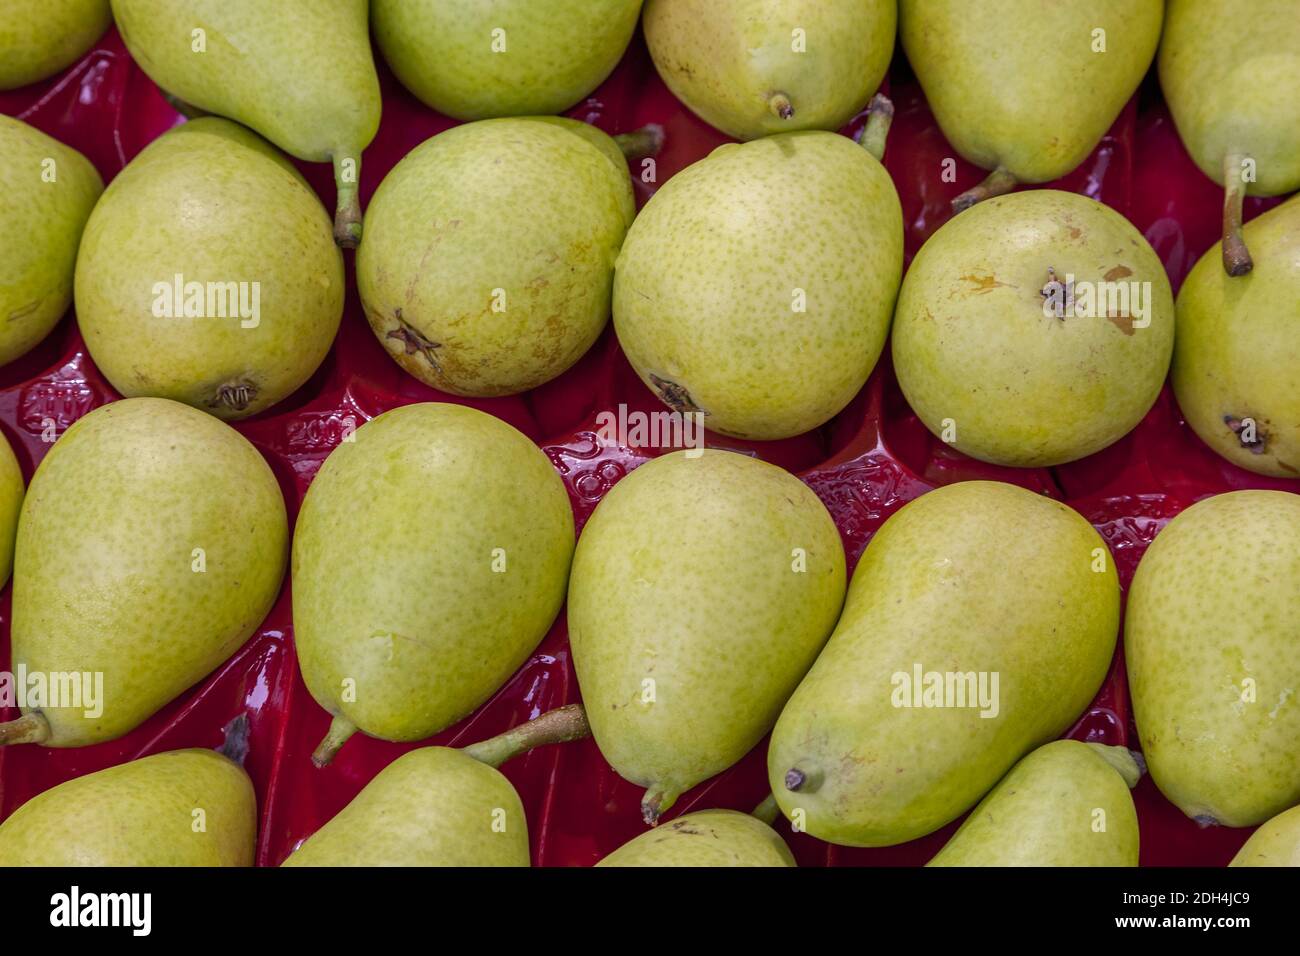 Pears (Pyrus) Stock Photo